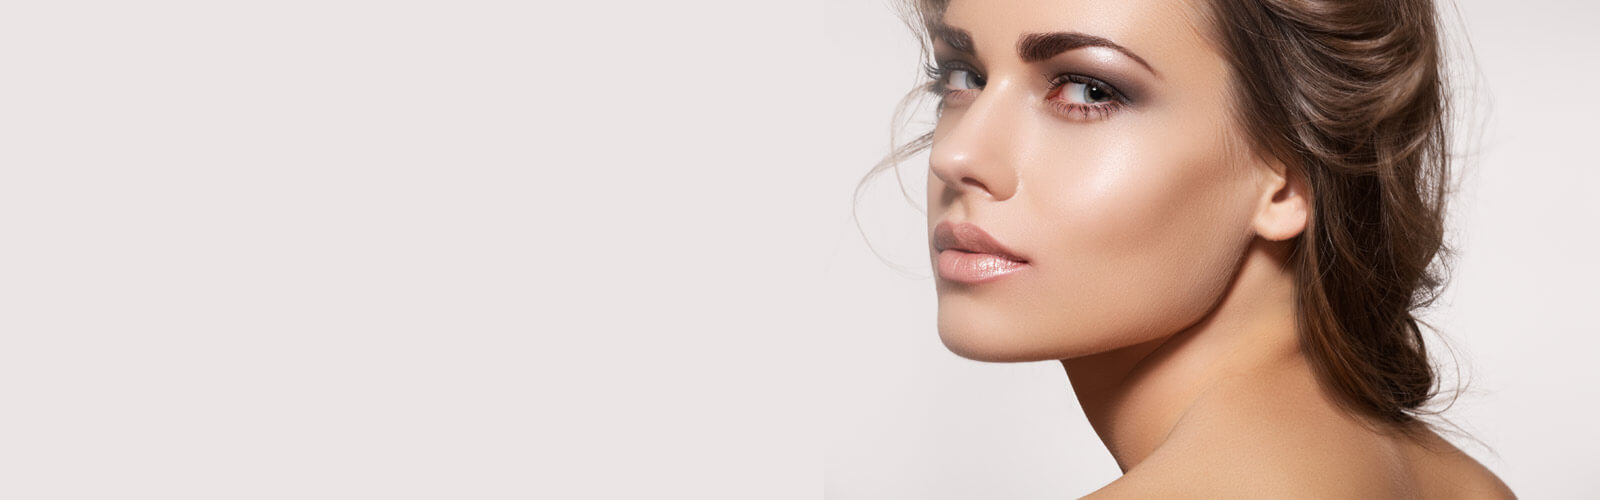 Is Kybella Treatment Right for Me?